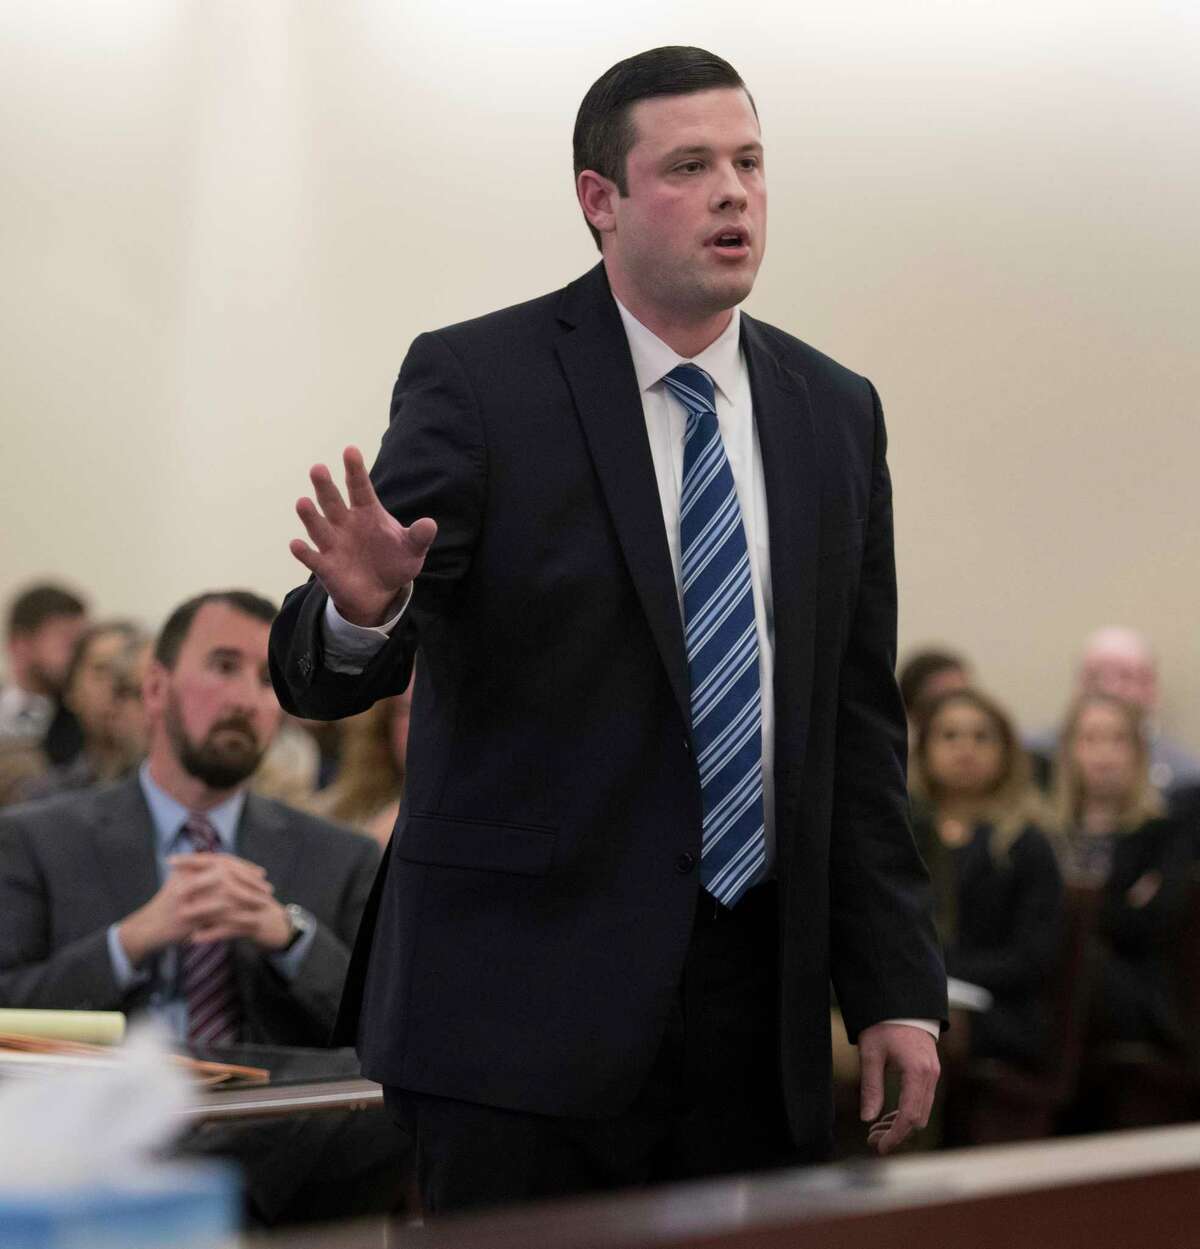 Albany County Assistant District Attorney Steve Sharp speaks during opening arguments in the Mero case in Albany County Court Monday Dec 1, 2017 in Albany, NY. (Skip Dickstein/ Times Union)